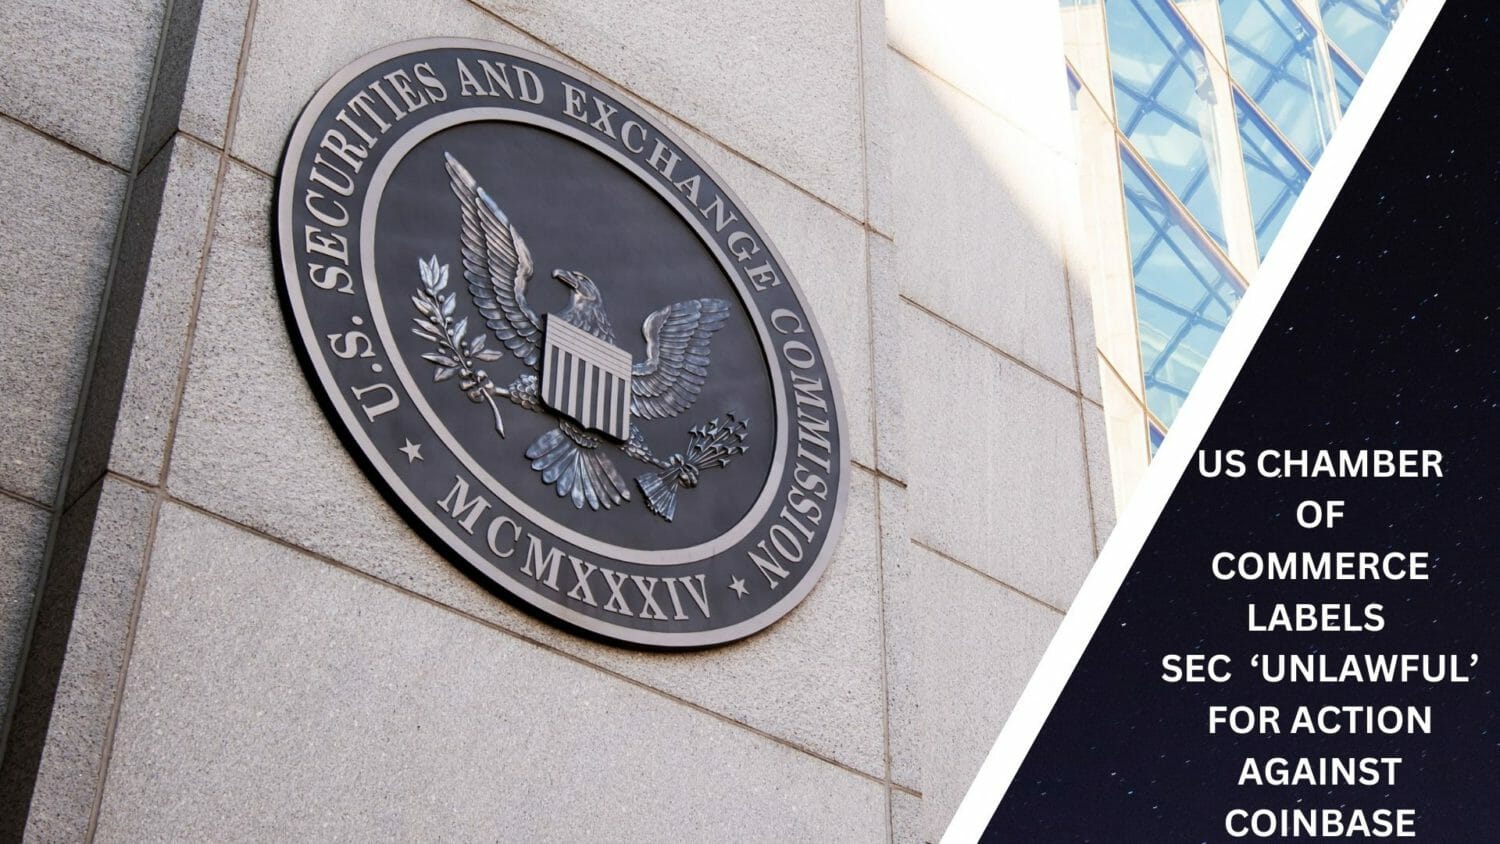 Us Chamber Of Commerce Labels Sec  ‘Unlawful’ For Action Against Coinbase